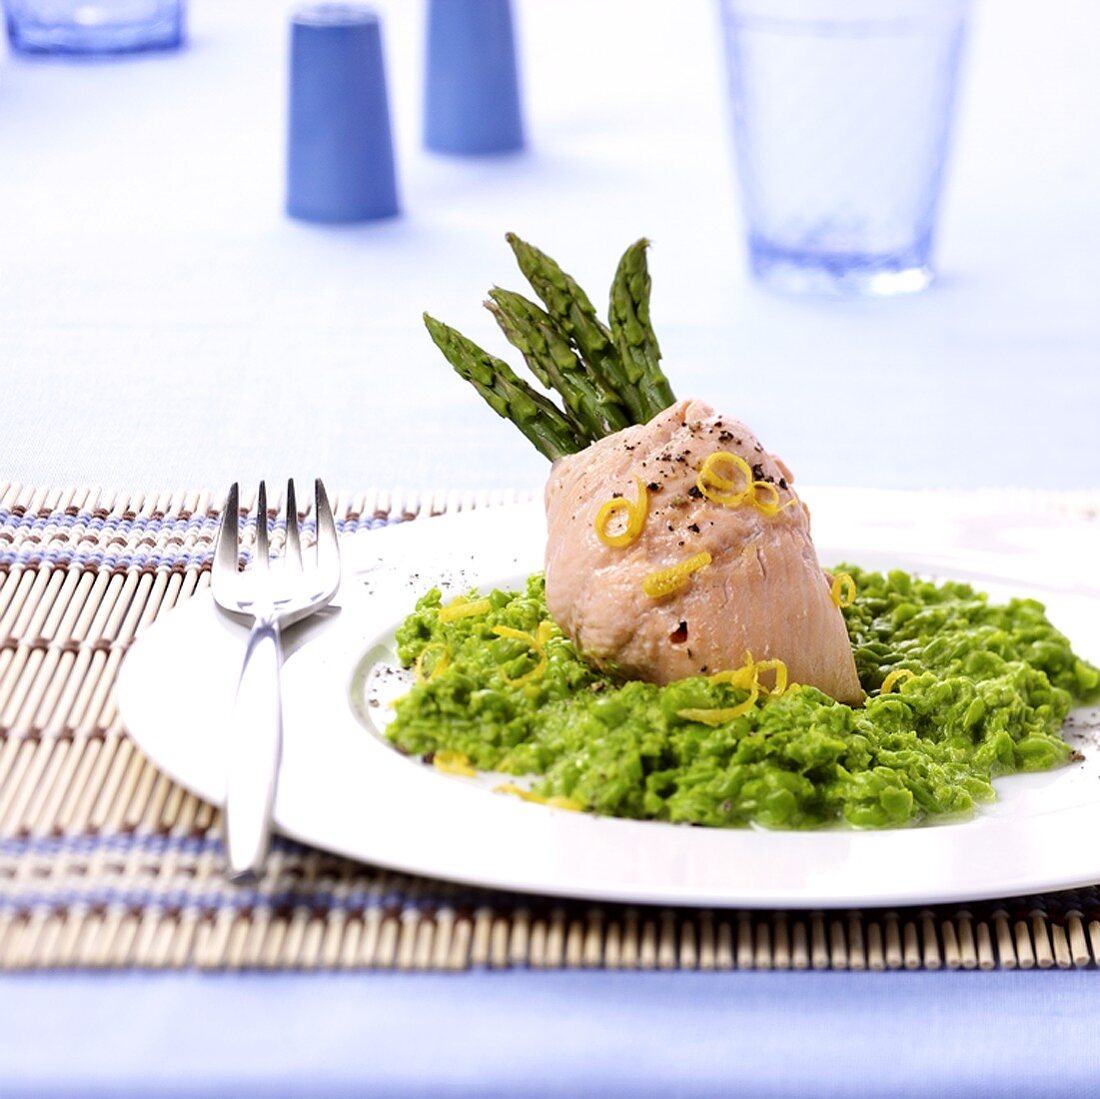 Steamed salmon trout with green asparagus and pea puree